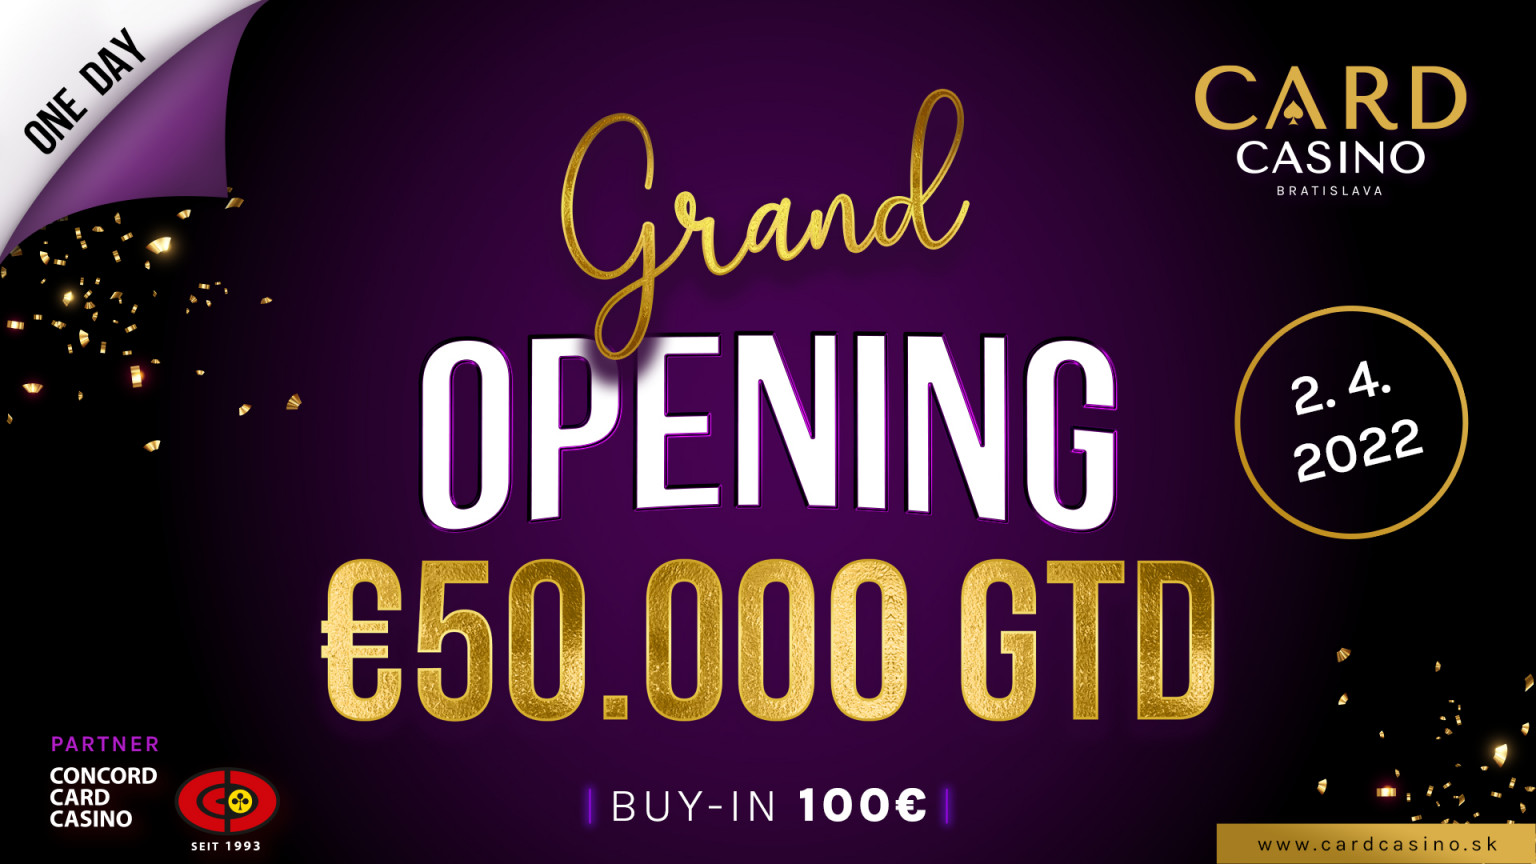 Delicacy at Card Casino. Tune in to the one-day Grand Opening with €50,000 GTD!